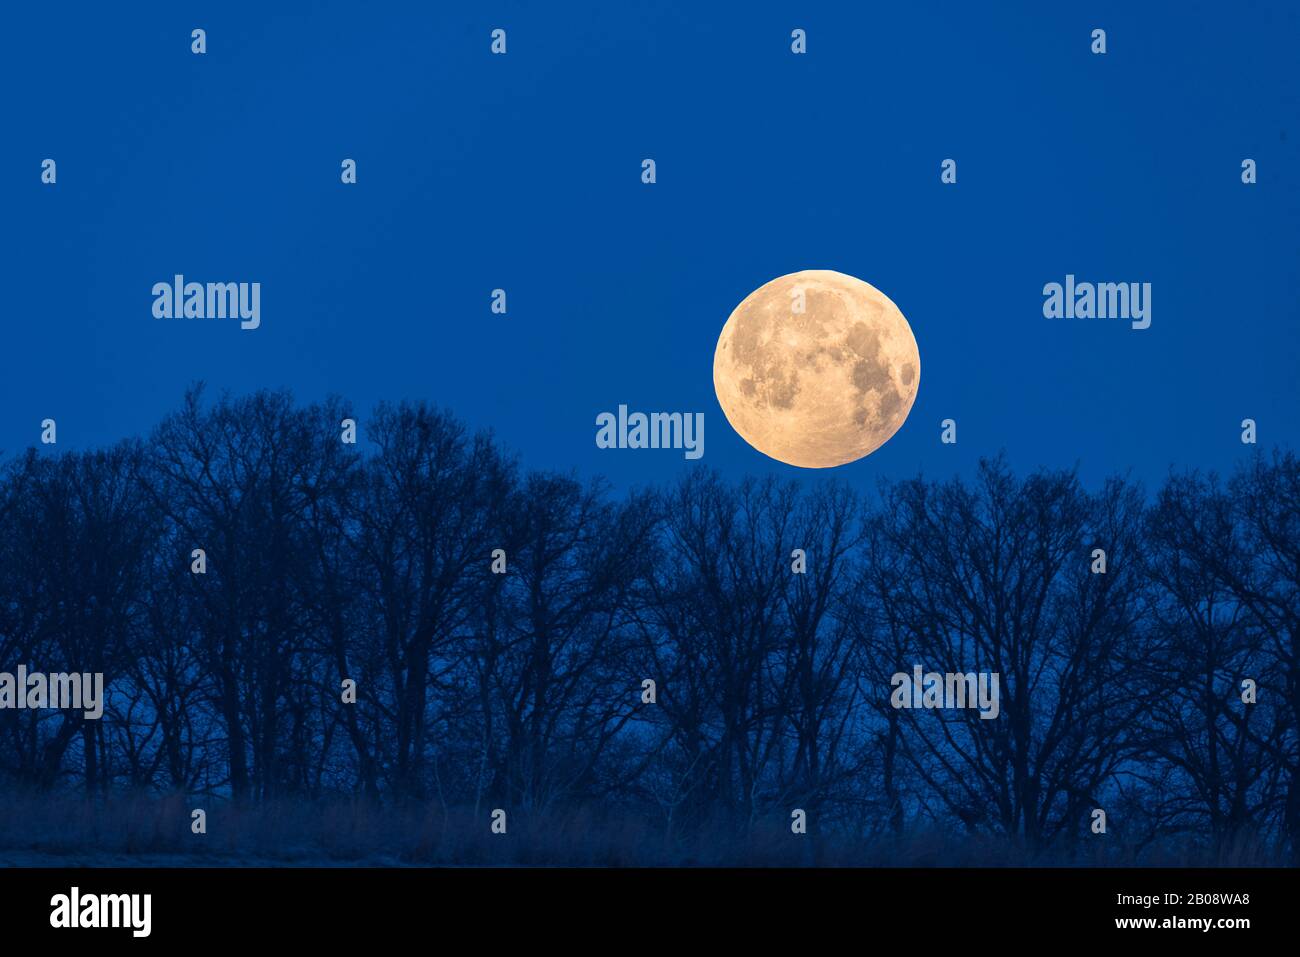 big yellow full moon looks above tree silhouettes in blue sky Stock Photo